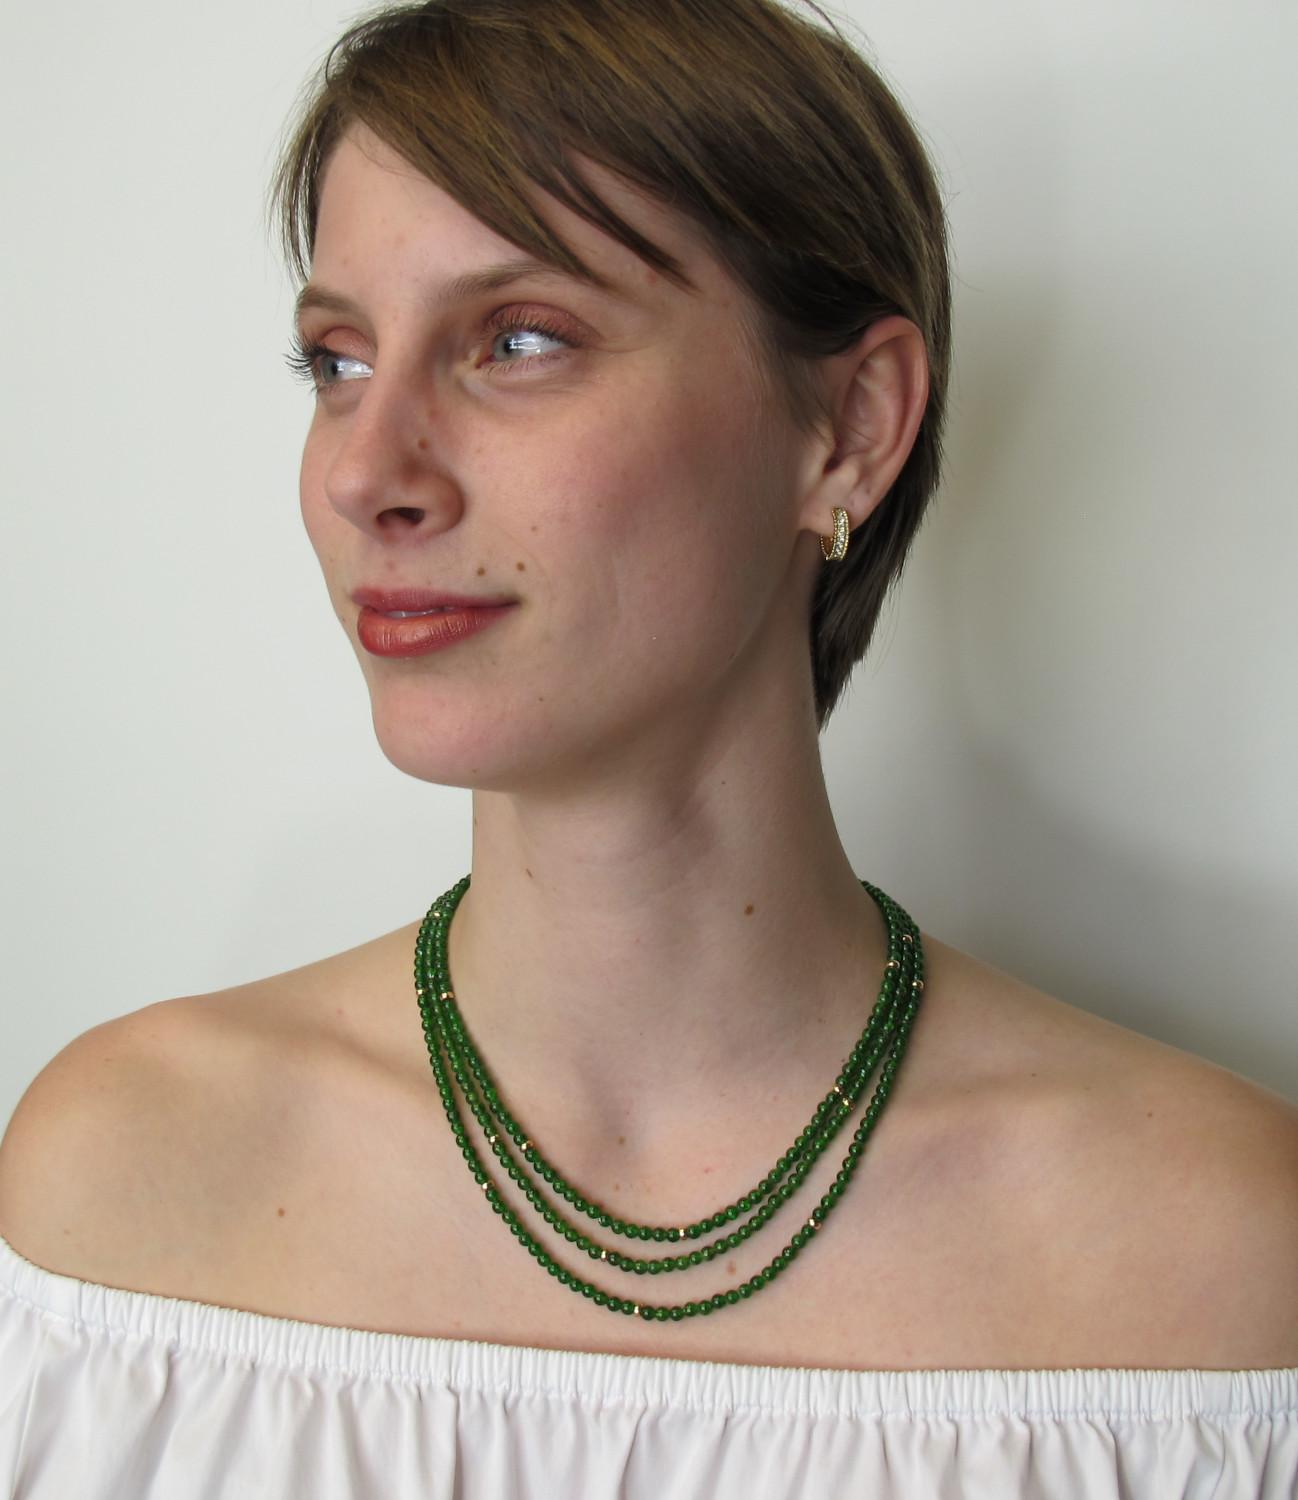 This elegant chrome diopside beaded necklace is worthy of Lady Mary Crawley! Gem dealers have long sought luxurious green gems other than emeralds, hence their excitement over chrome diopside and its bright, rich green color. The beads in this